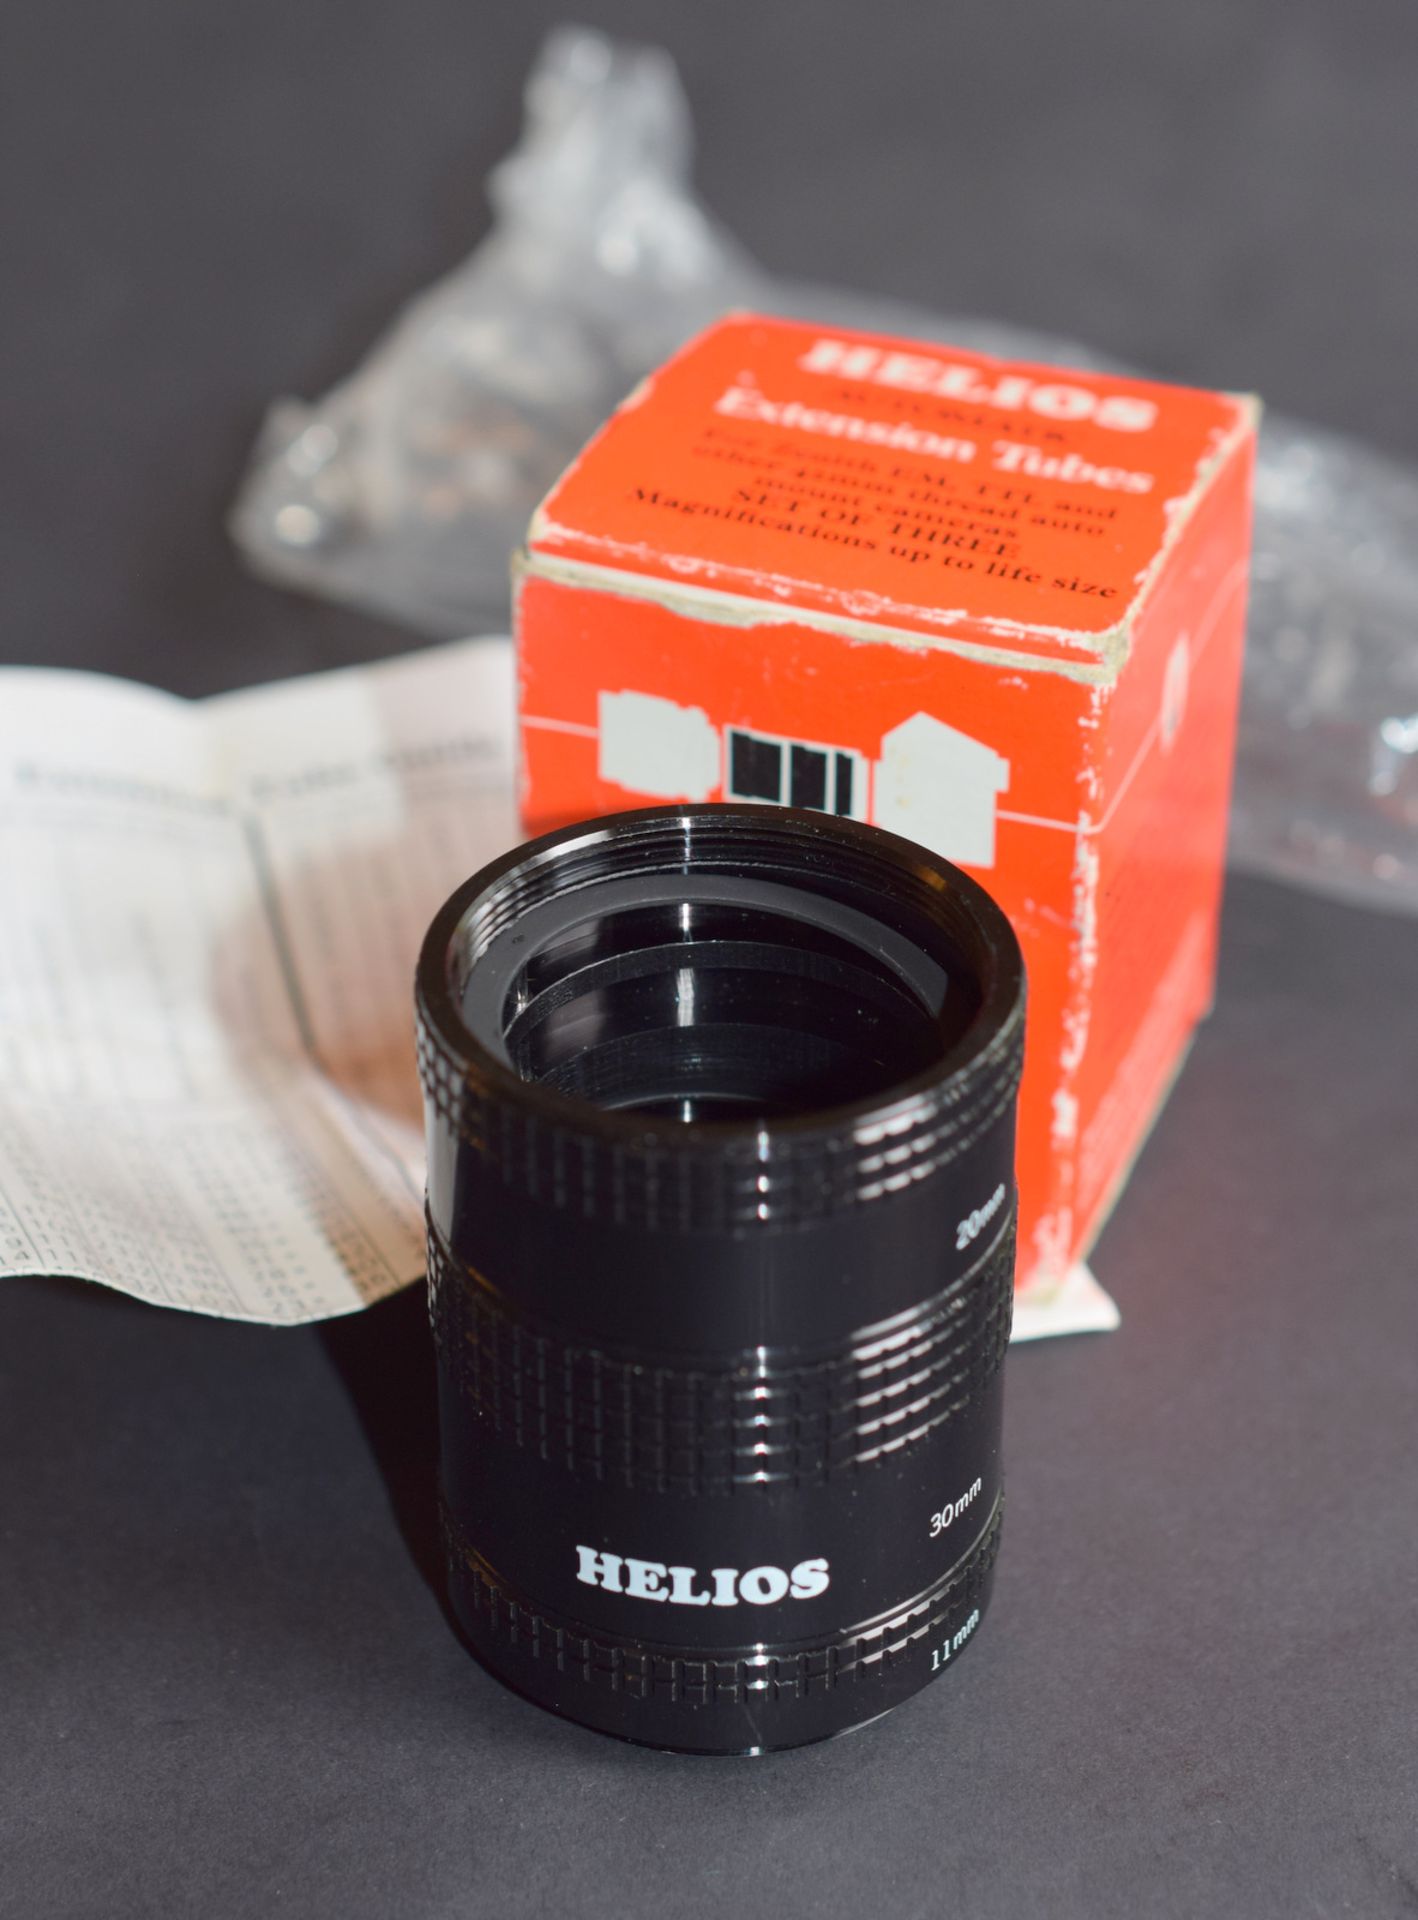 Set of 3 automatic Helios M42 Screwmount Extension Tubes - Image 2 of 2